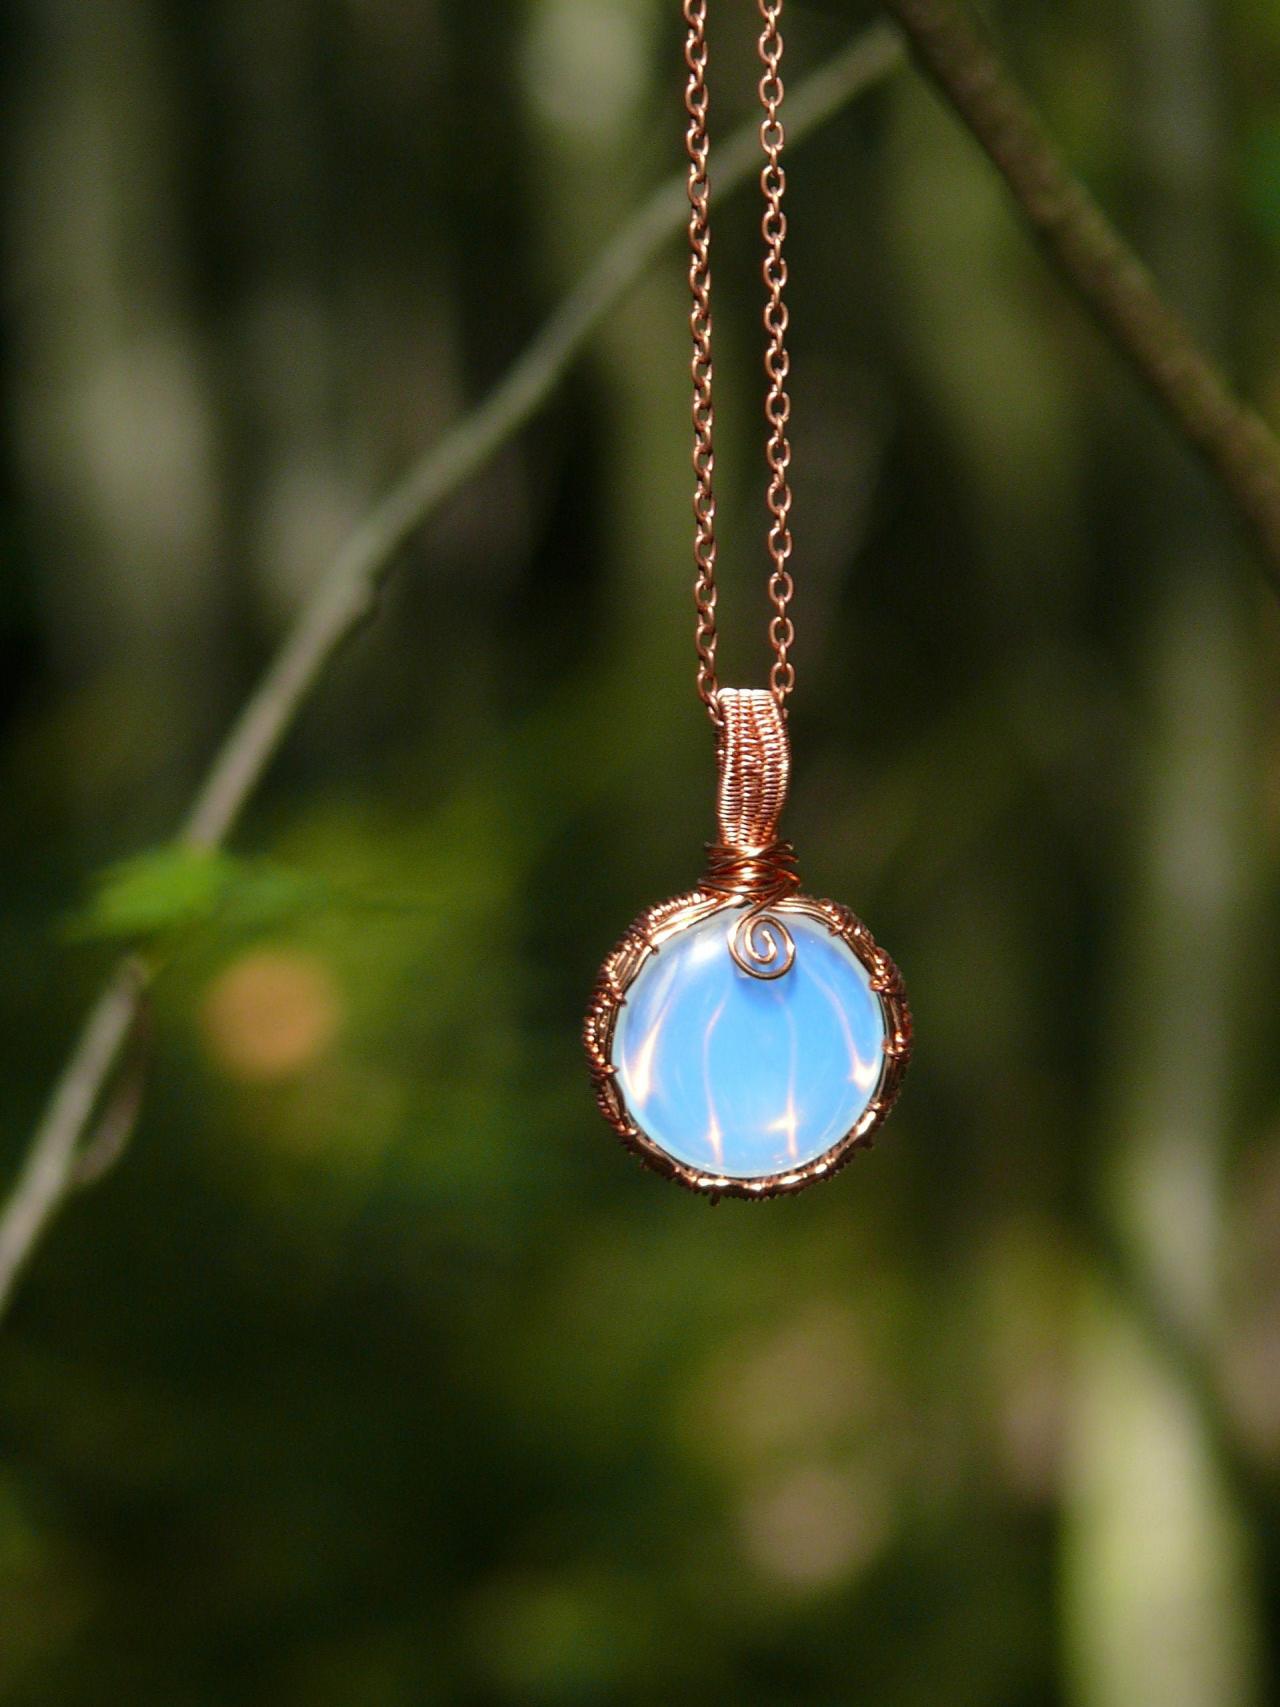 Wire Wrapped Opalite Necklace, Copper Wrapped Stone Necklace, White Boho Pendant, Opalescent Milky White Glass Stone Pendant, Blue Pendant